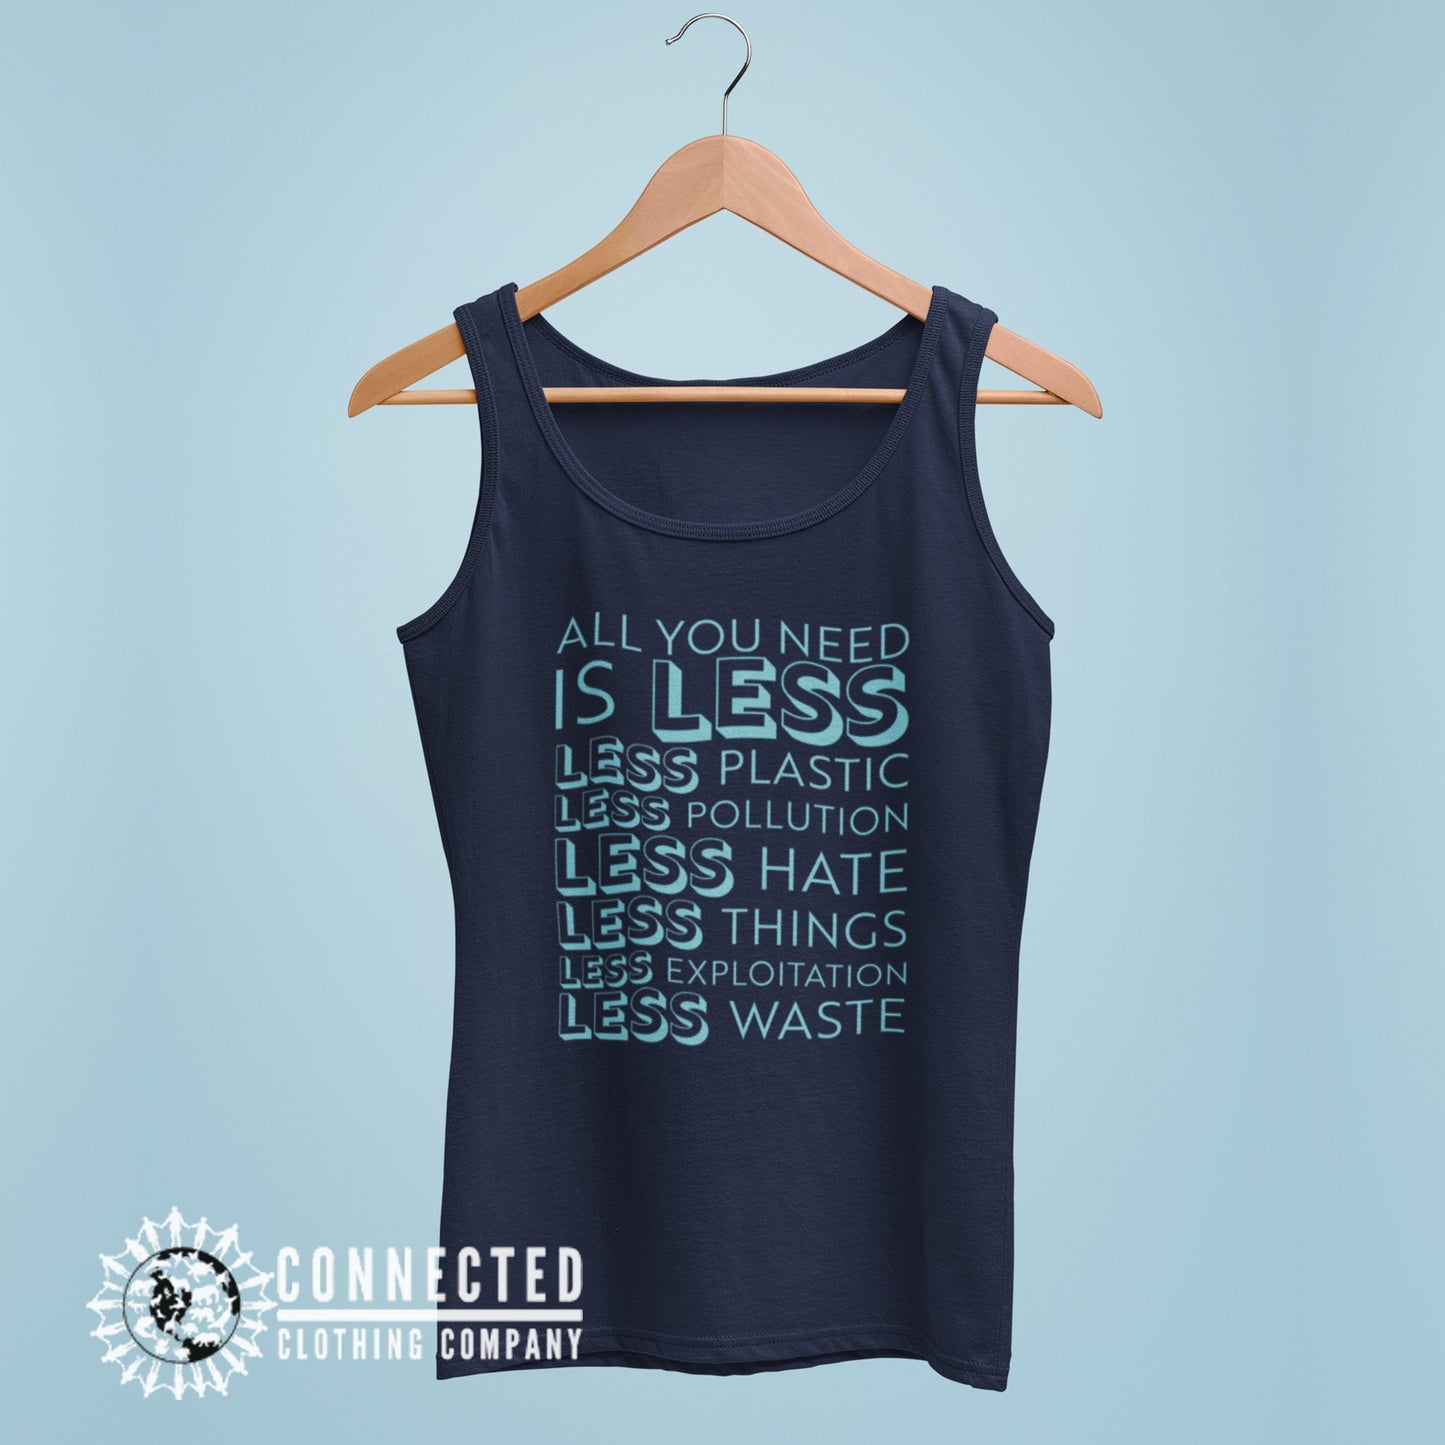 Navy All You Need Is Less Women's Tank Top - Connected Clothing Company - 10% of profits donated to Mission Blue ocean conservation